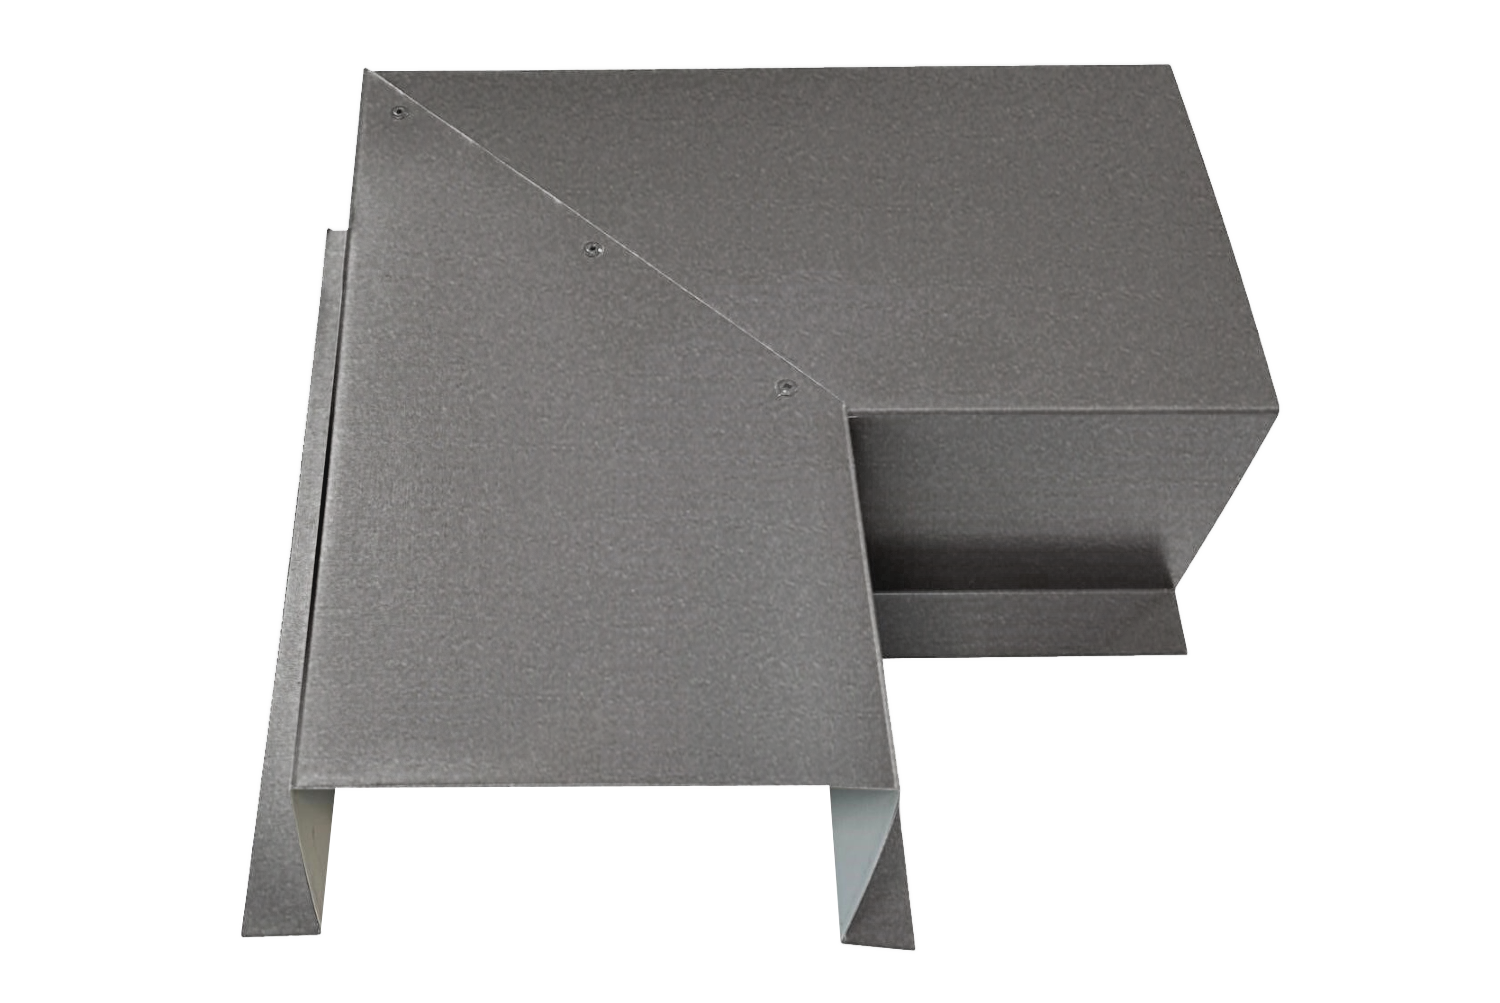 A gray metal corner piece appears in the image, consisting of flat planes and right-angled bends. Made from premium quality 24 gauge steel, the piece features a combination of horizontal, vertical, and diagonal surfaces, and seems to be a component used in construction or fabrication. This is the Perma Cover Commercial Series - 24 Gauge Line Set Cover Side Turning Elbows - Premium Quality.